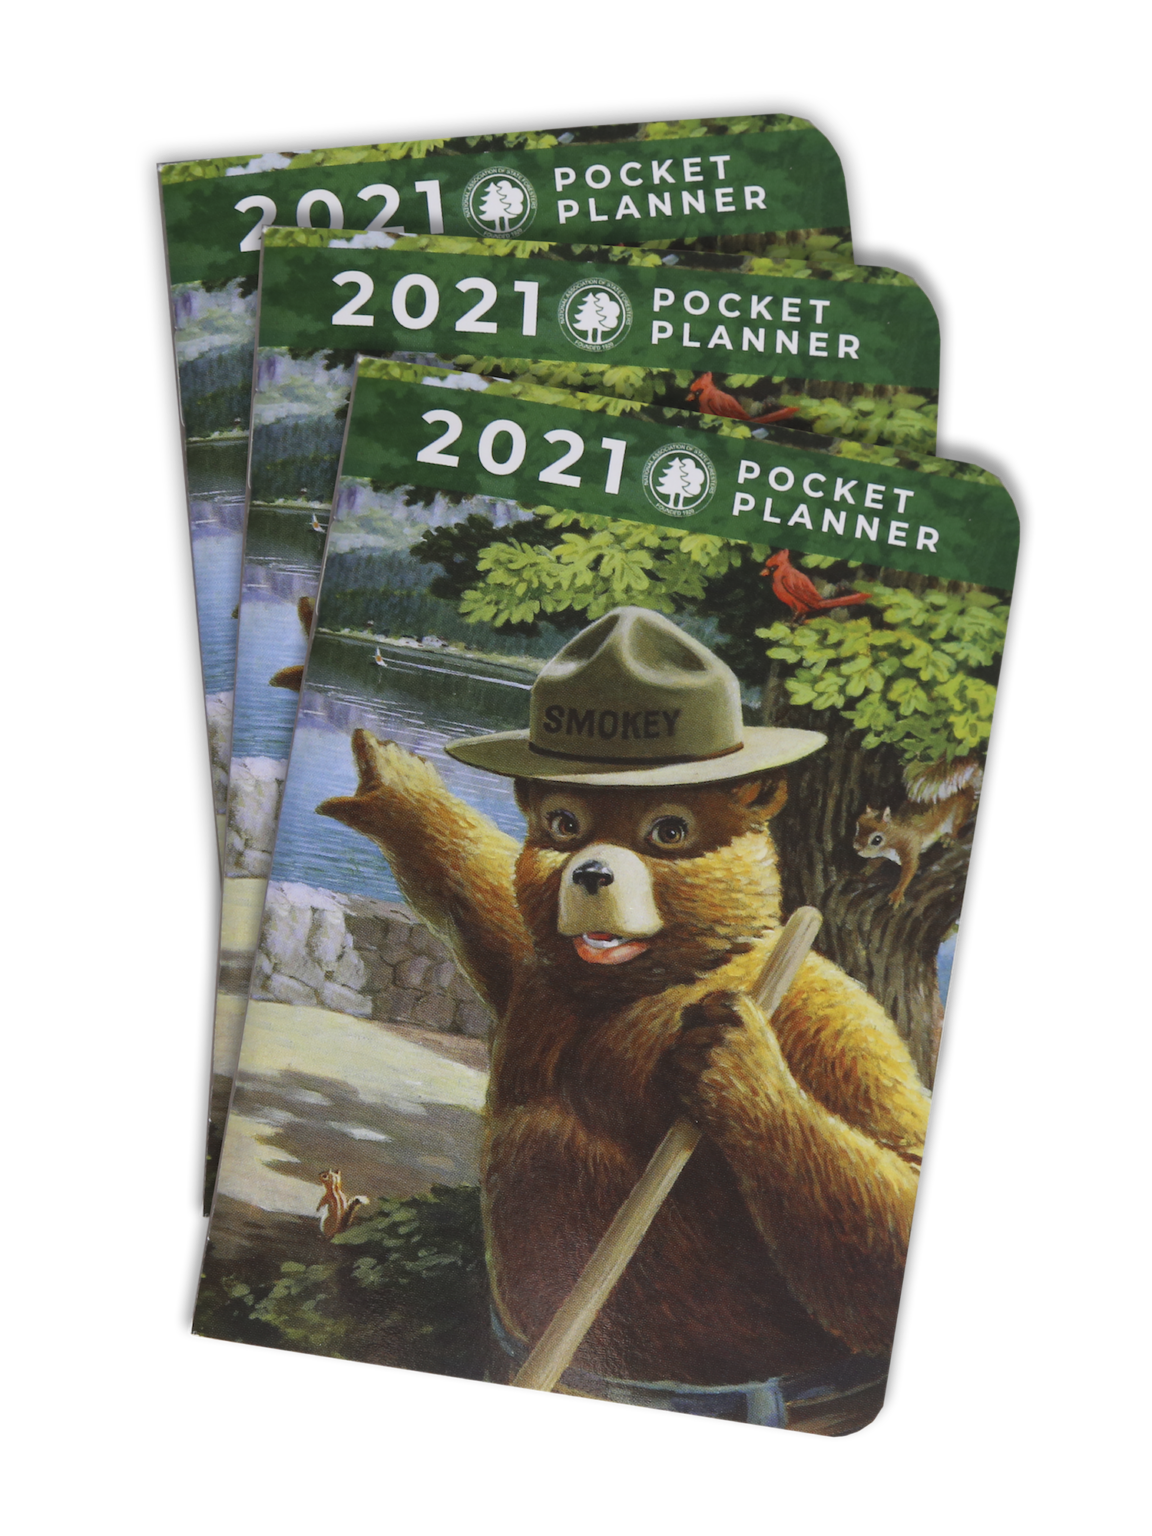 Show Some For Order Your 2021 Smokey Bear Pocket Planners National Association Of State